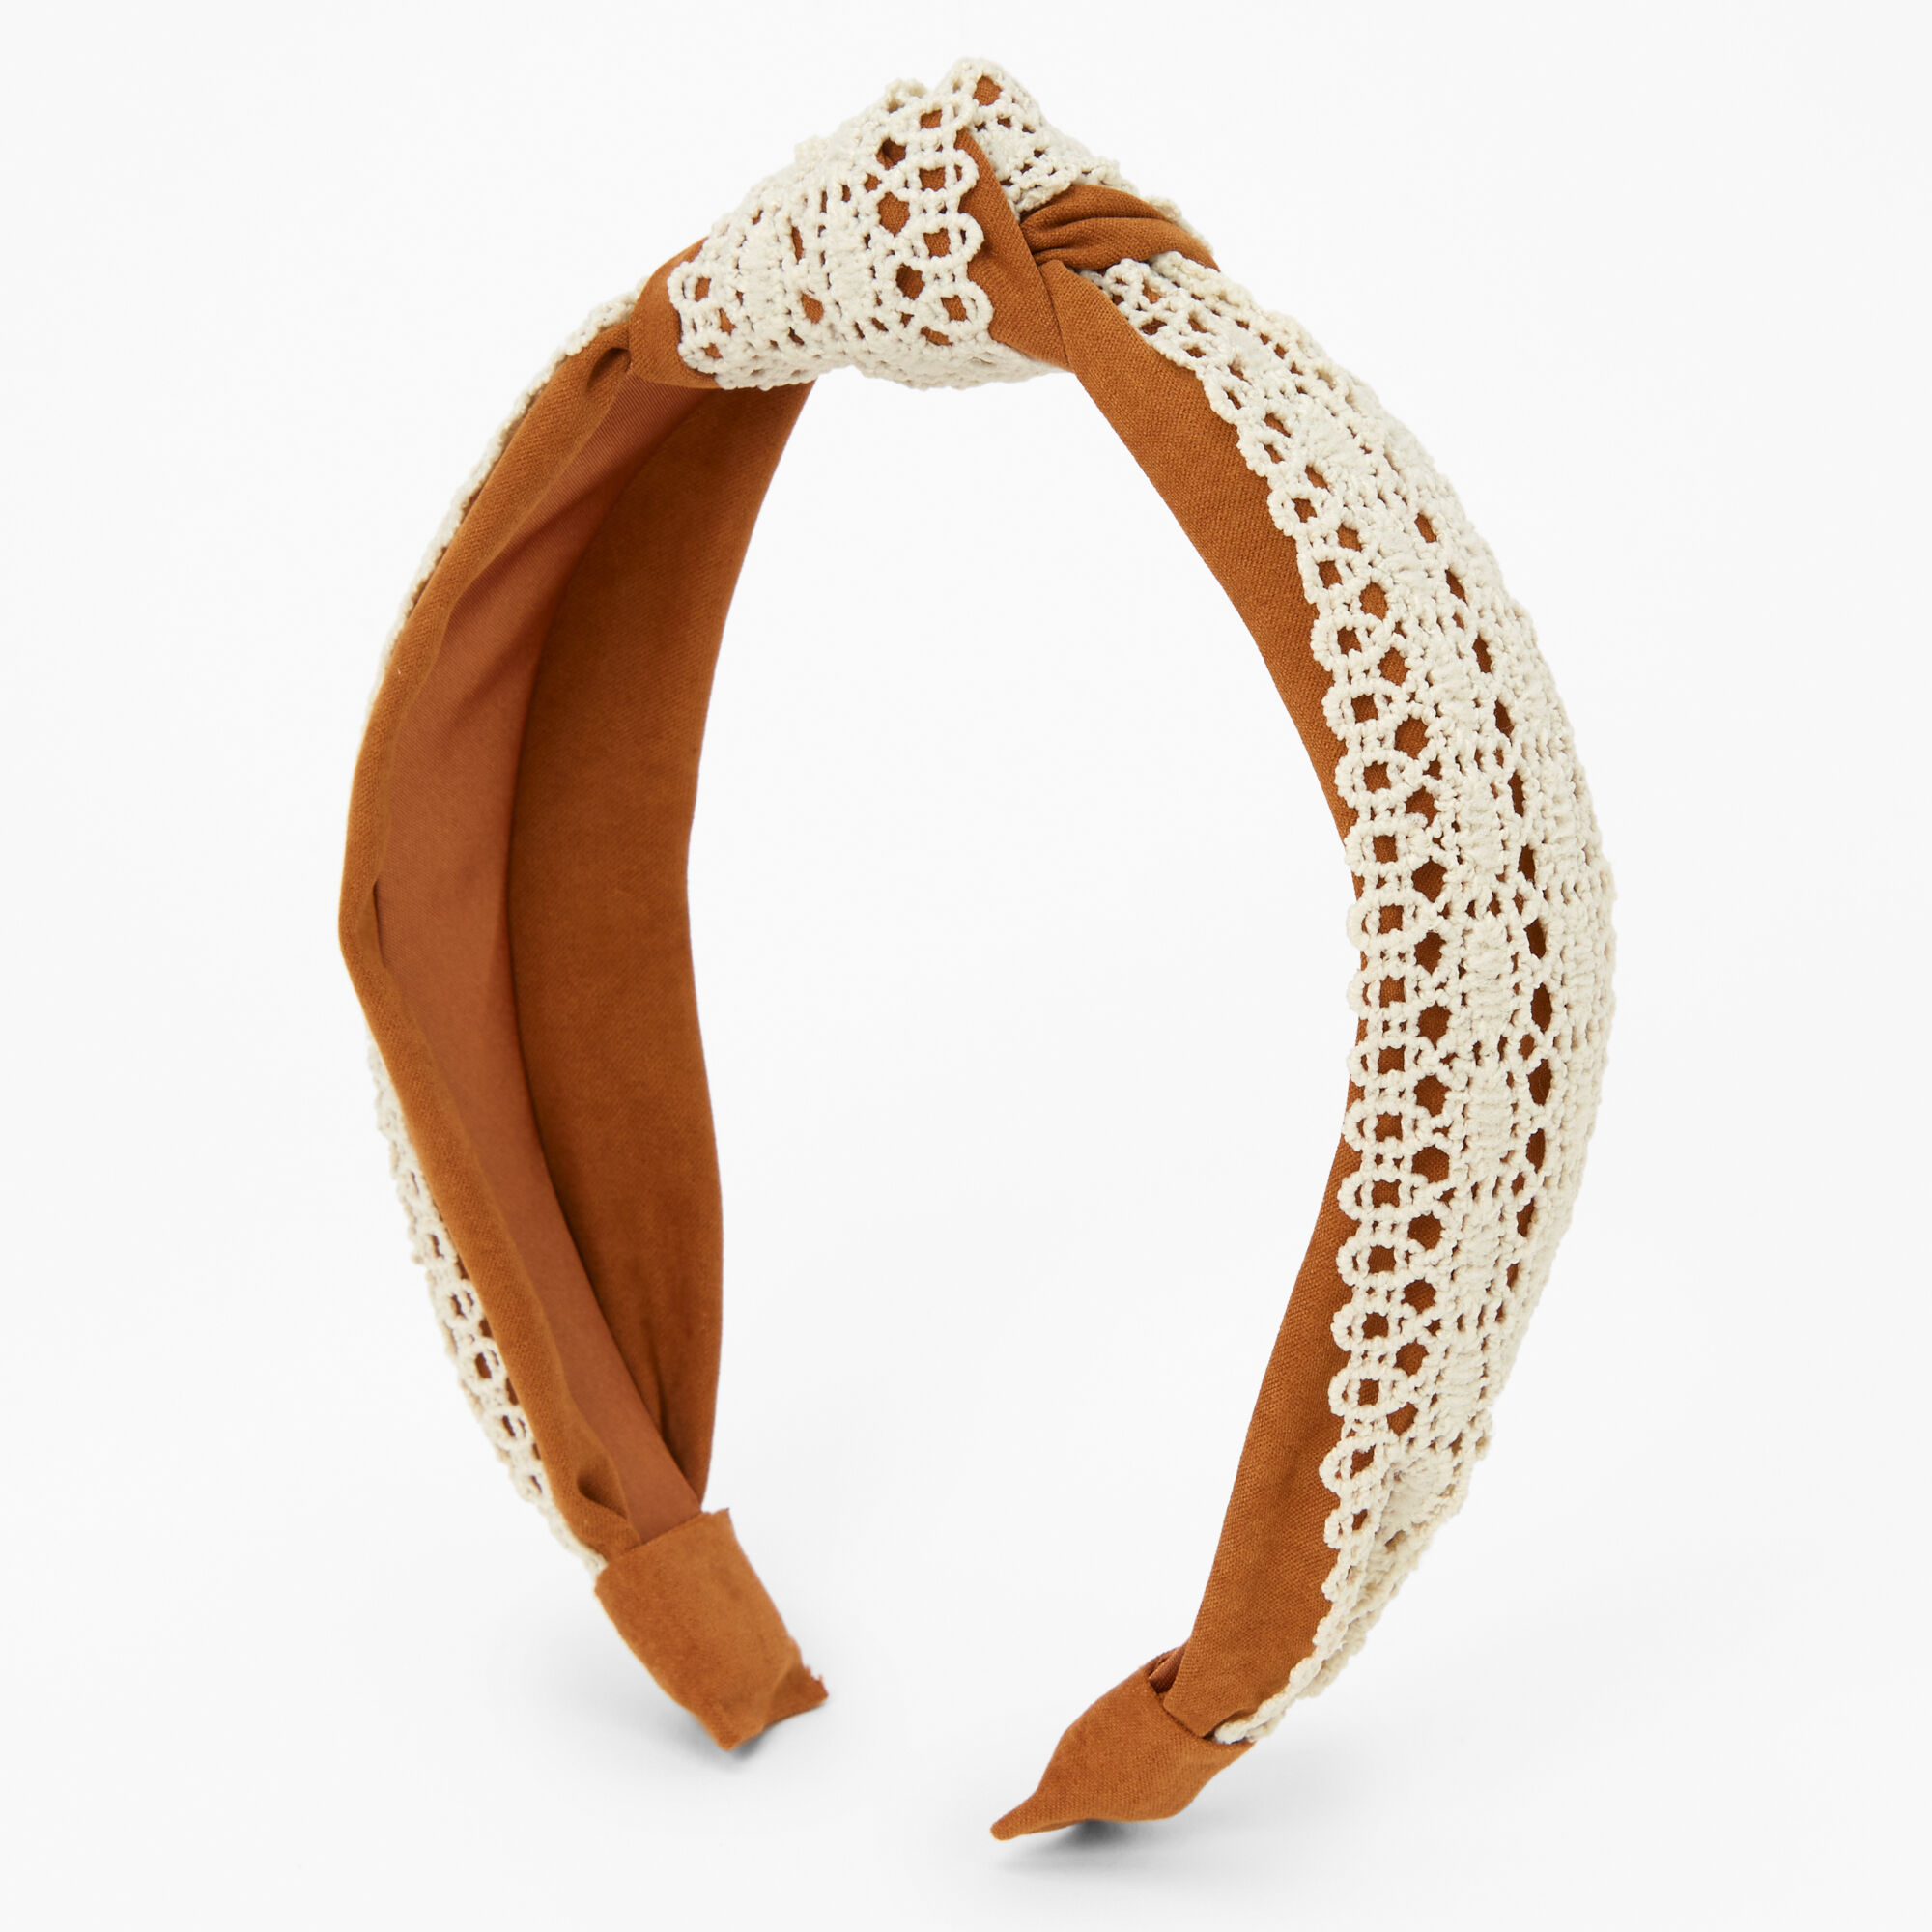 View Claires Crochet Knotted Headband Tan information